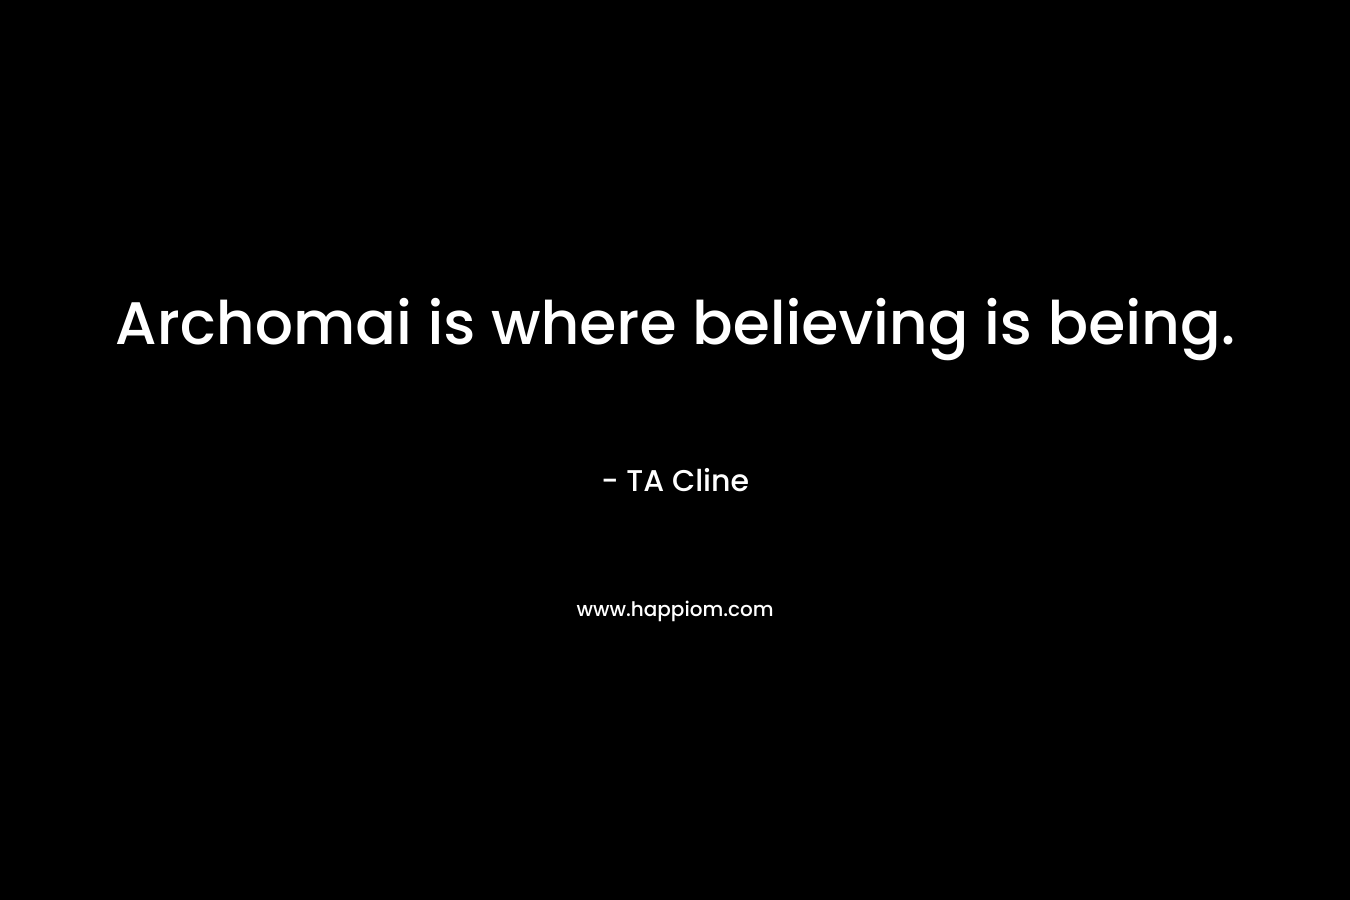 Archomai is where believing is being. – TA Cline